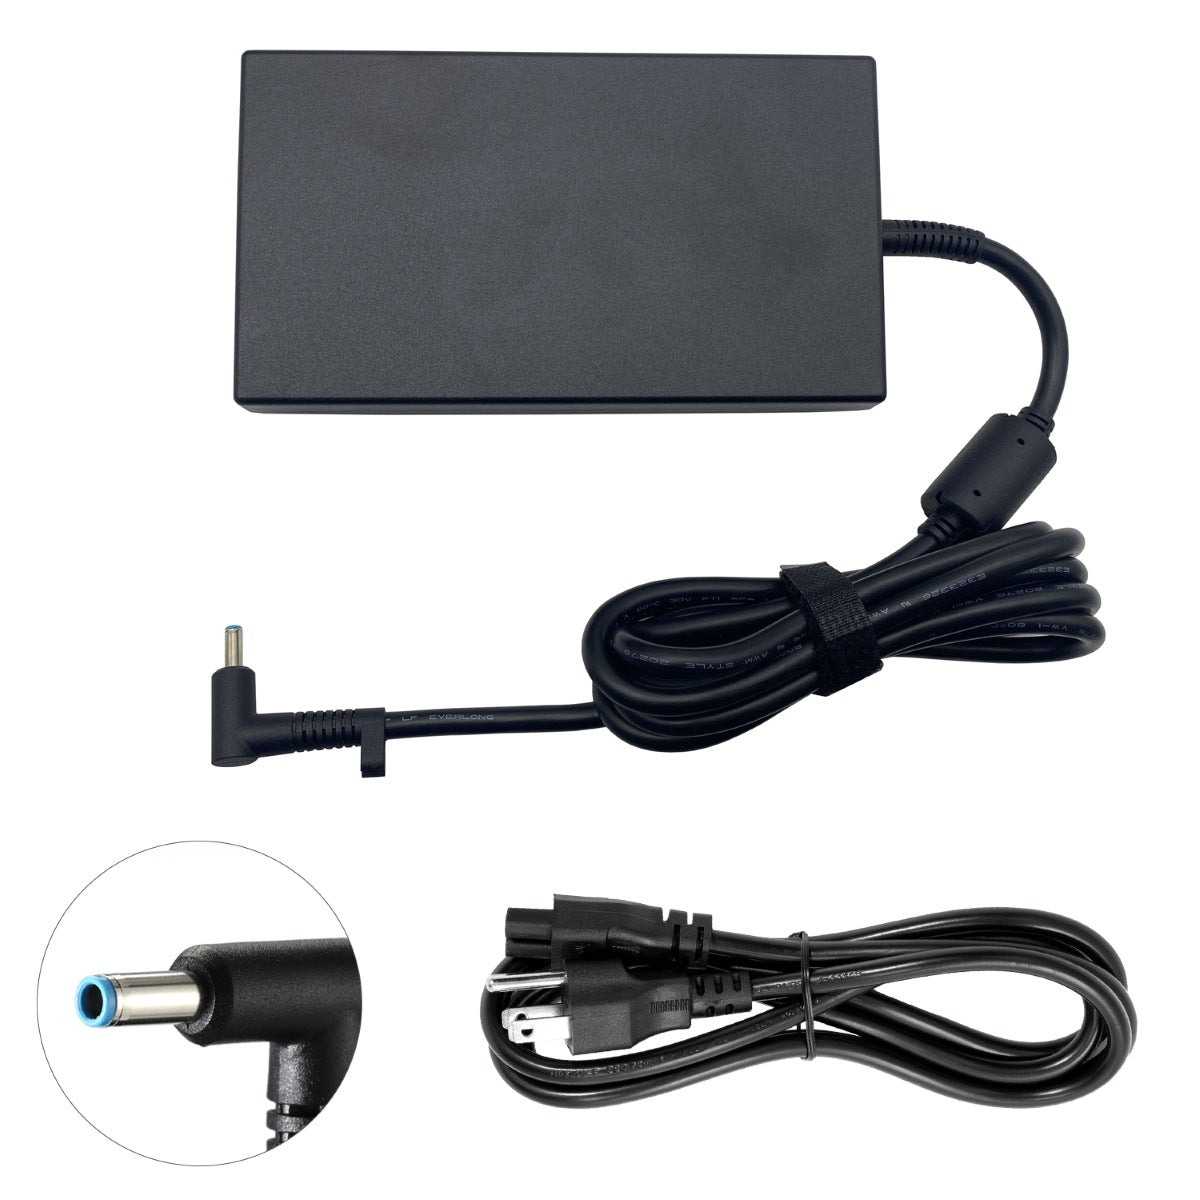 Charger for HP 15-eb0053dx Spectre x360 Notebook